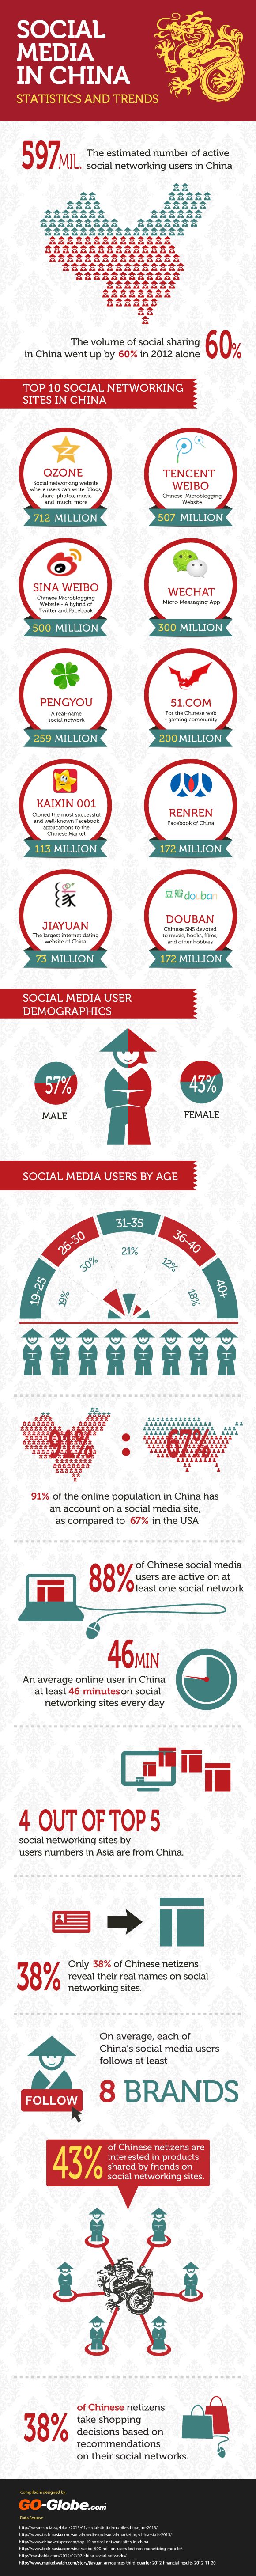 Infographie 19 - Social Media in China